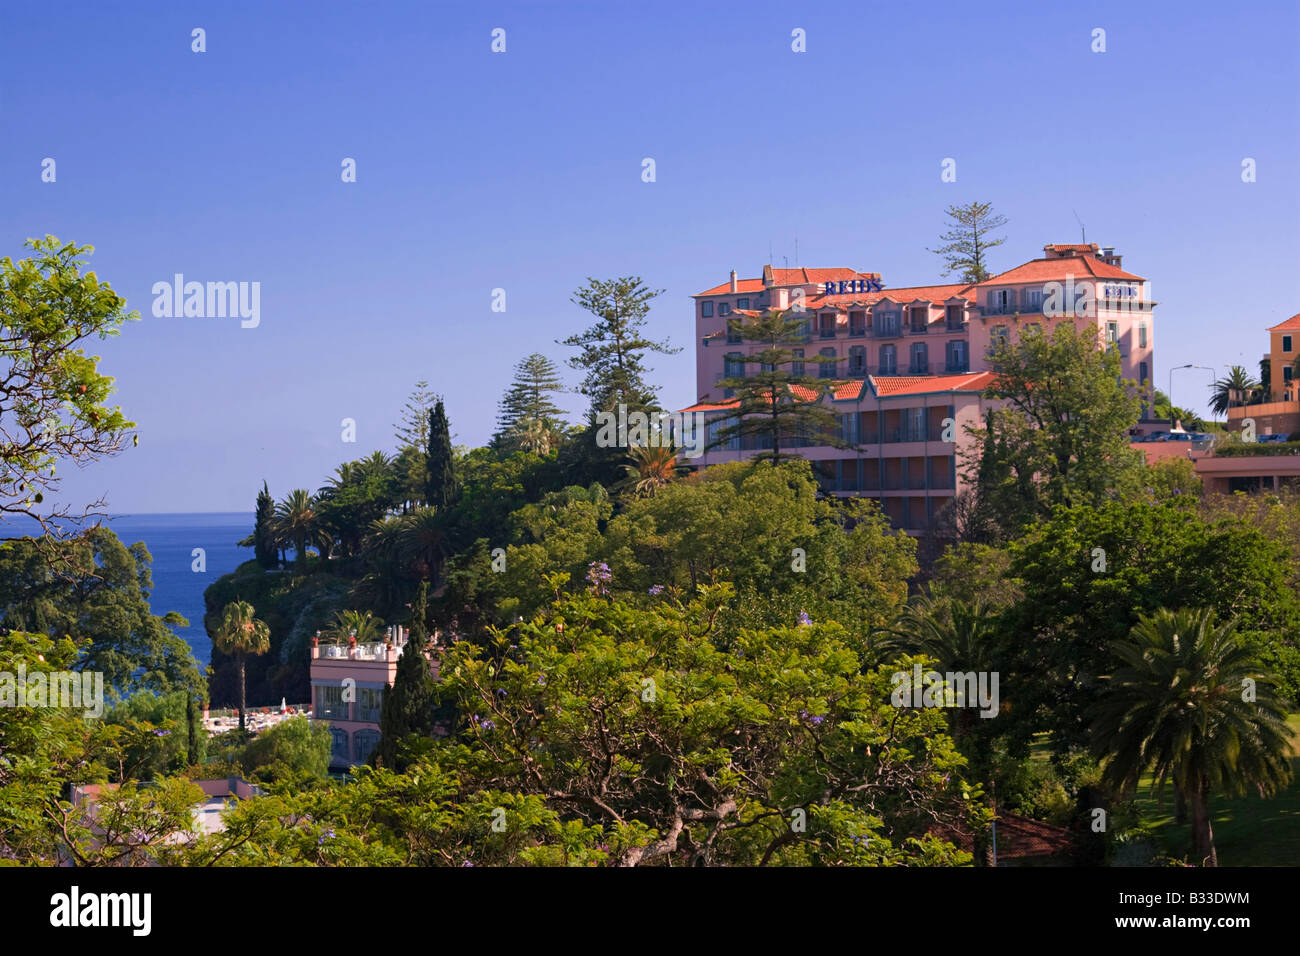 Reids Hotel in Funchal Madeira Stock Photo